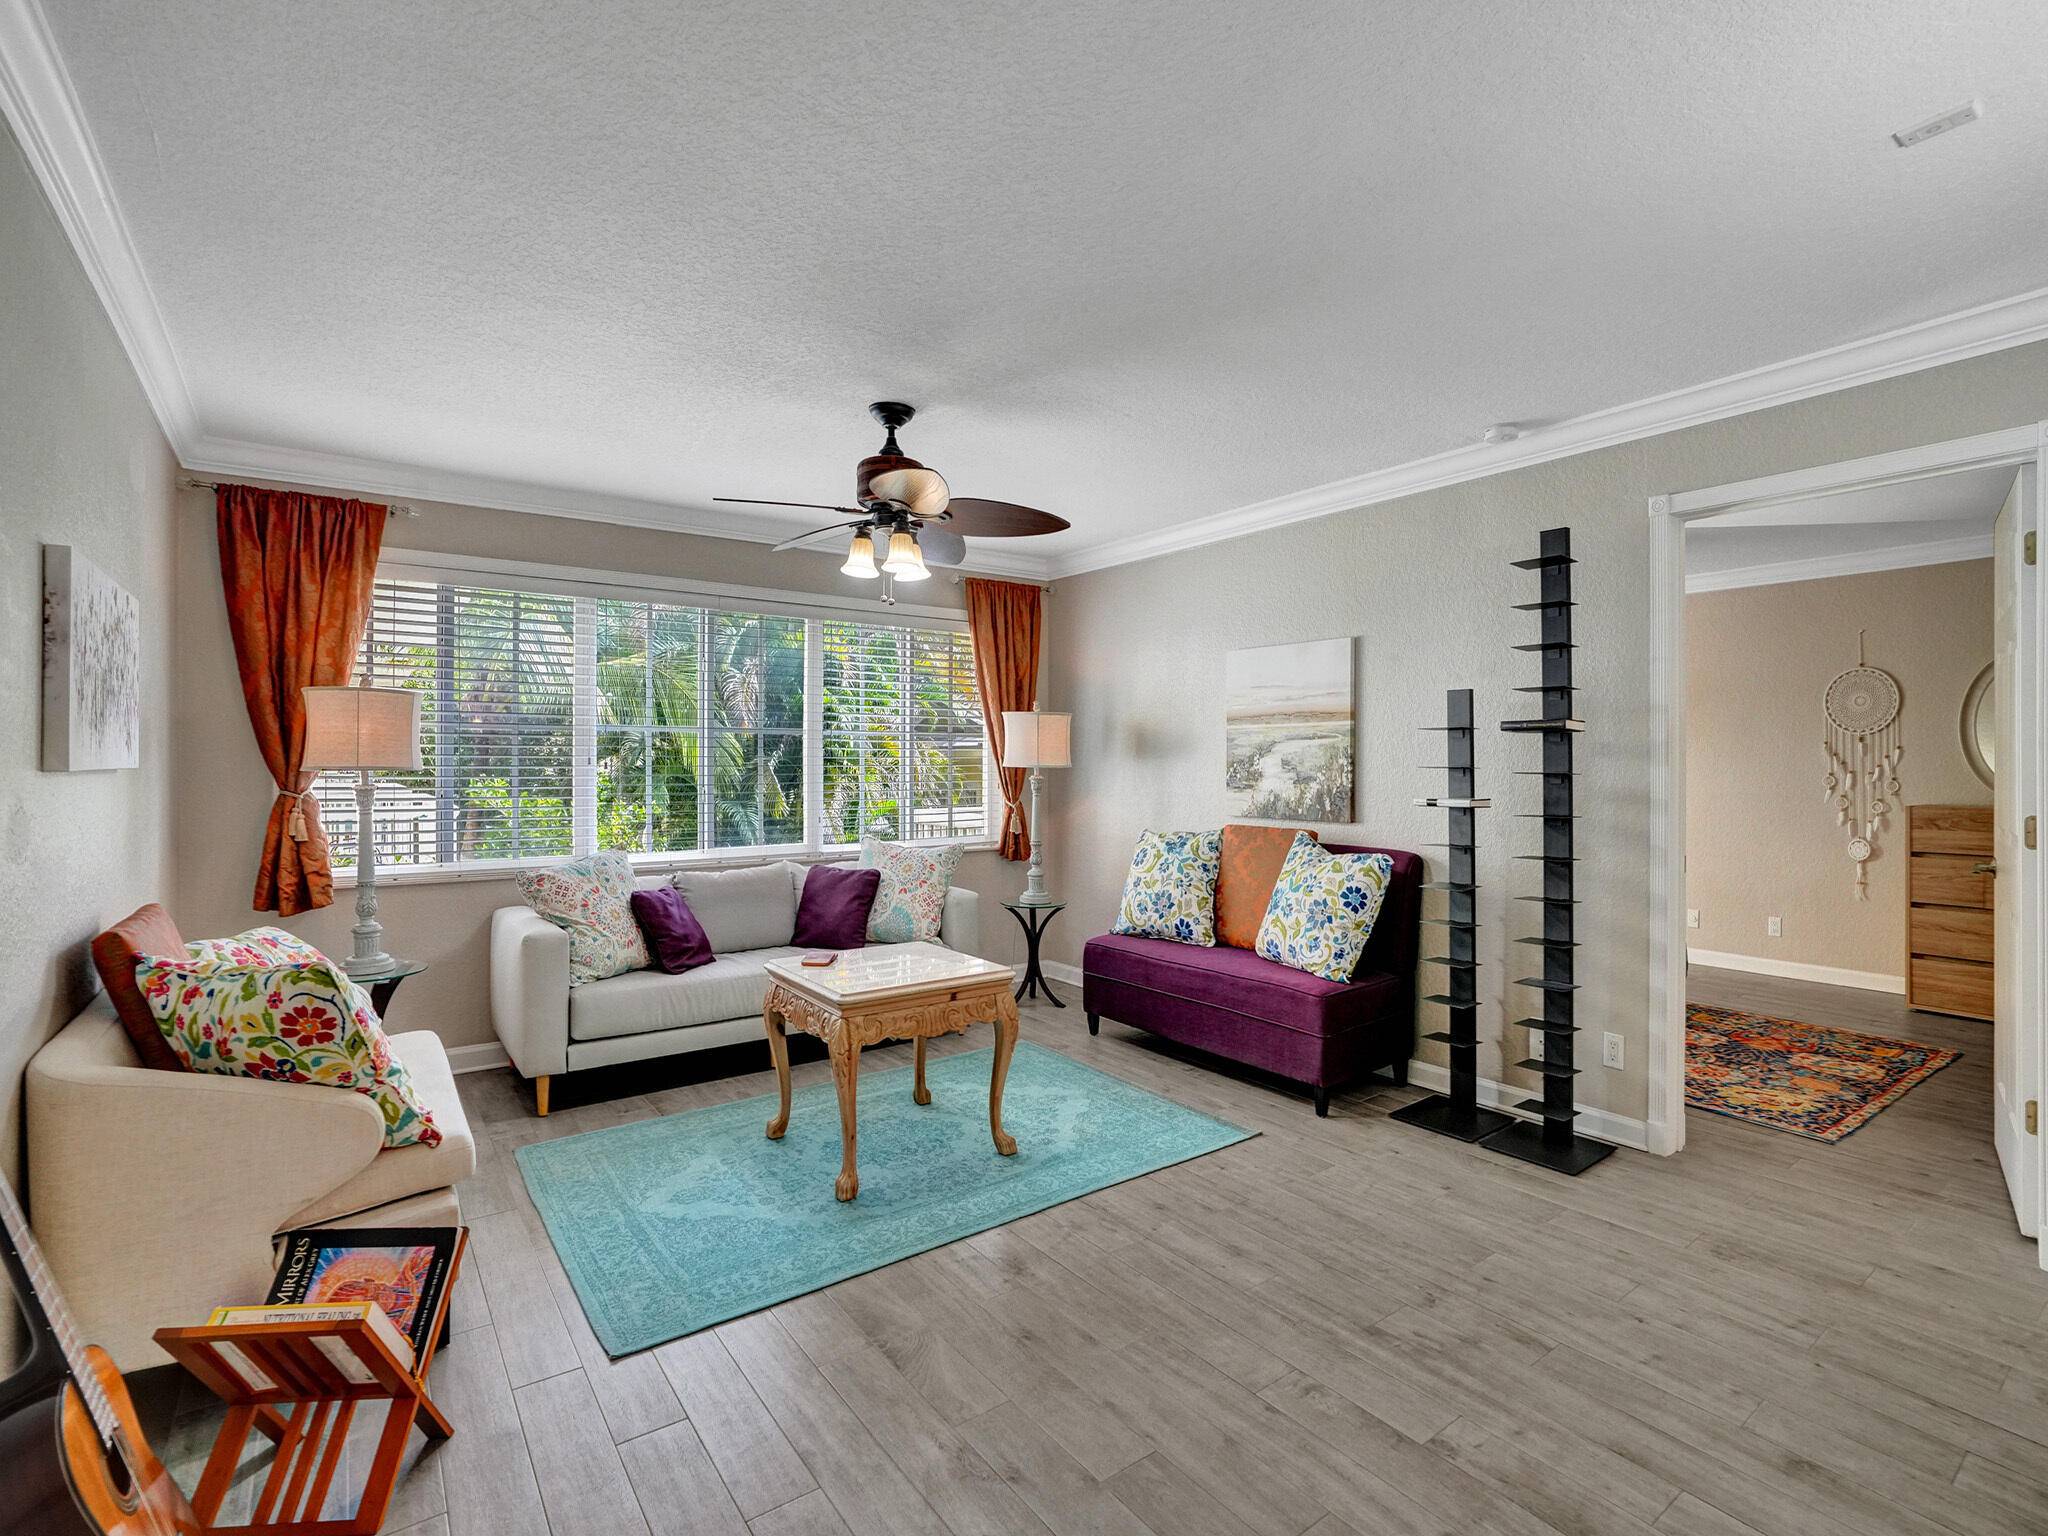 Nestled East of 95, this enchanting turn key condo is situated in the sought after Victoria Park neighborhood of Ft Lauderdale.